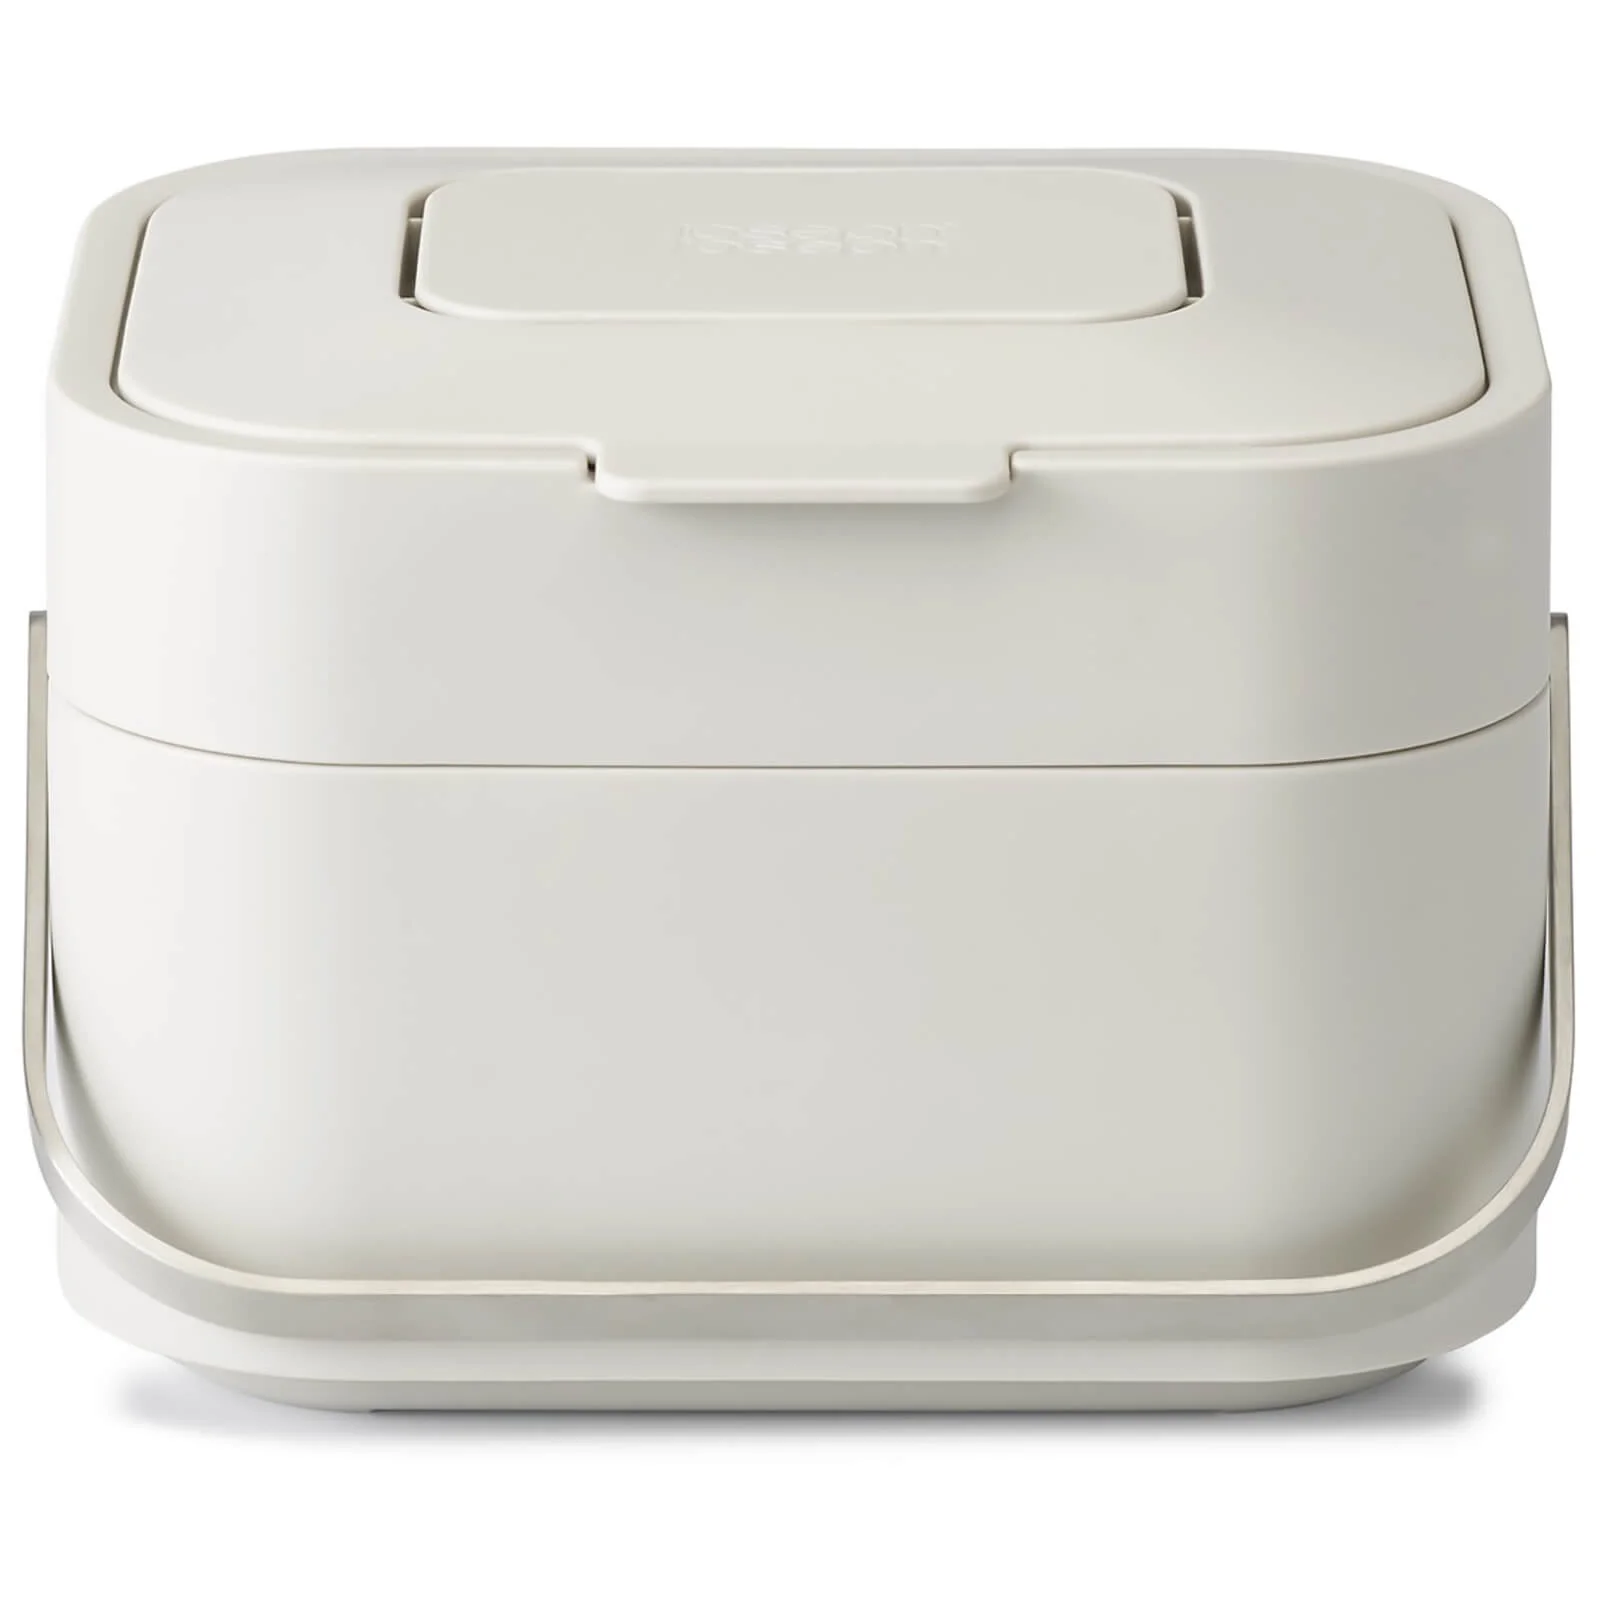 Joseph Joseph Stack 4 Food Waste Caddy With Odour Filter - Stone Image 1